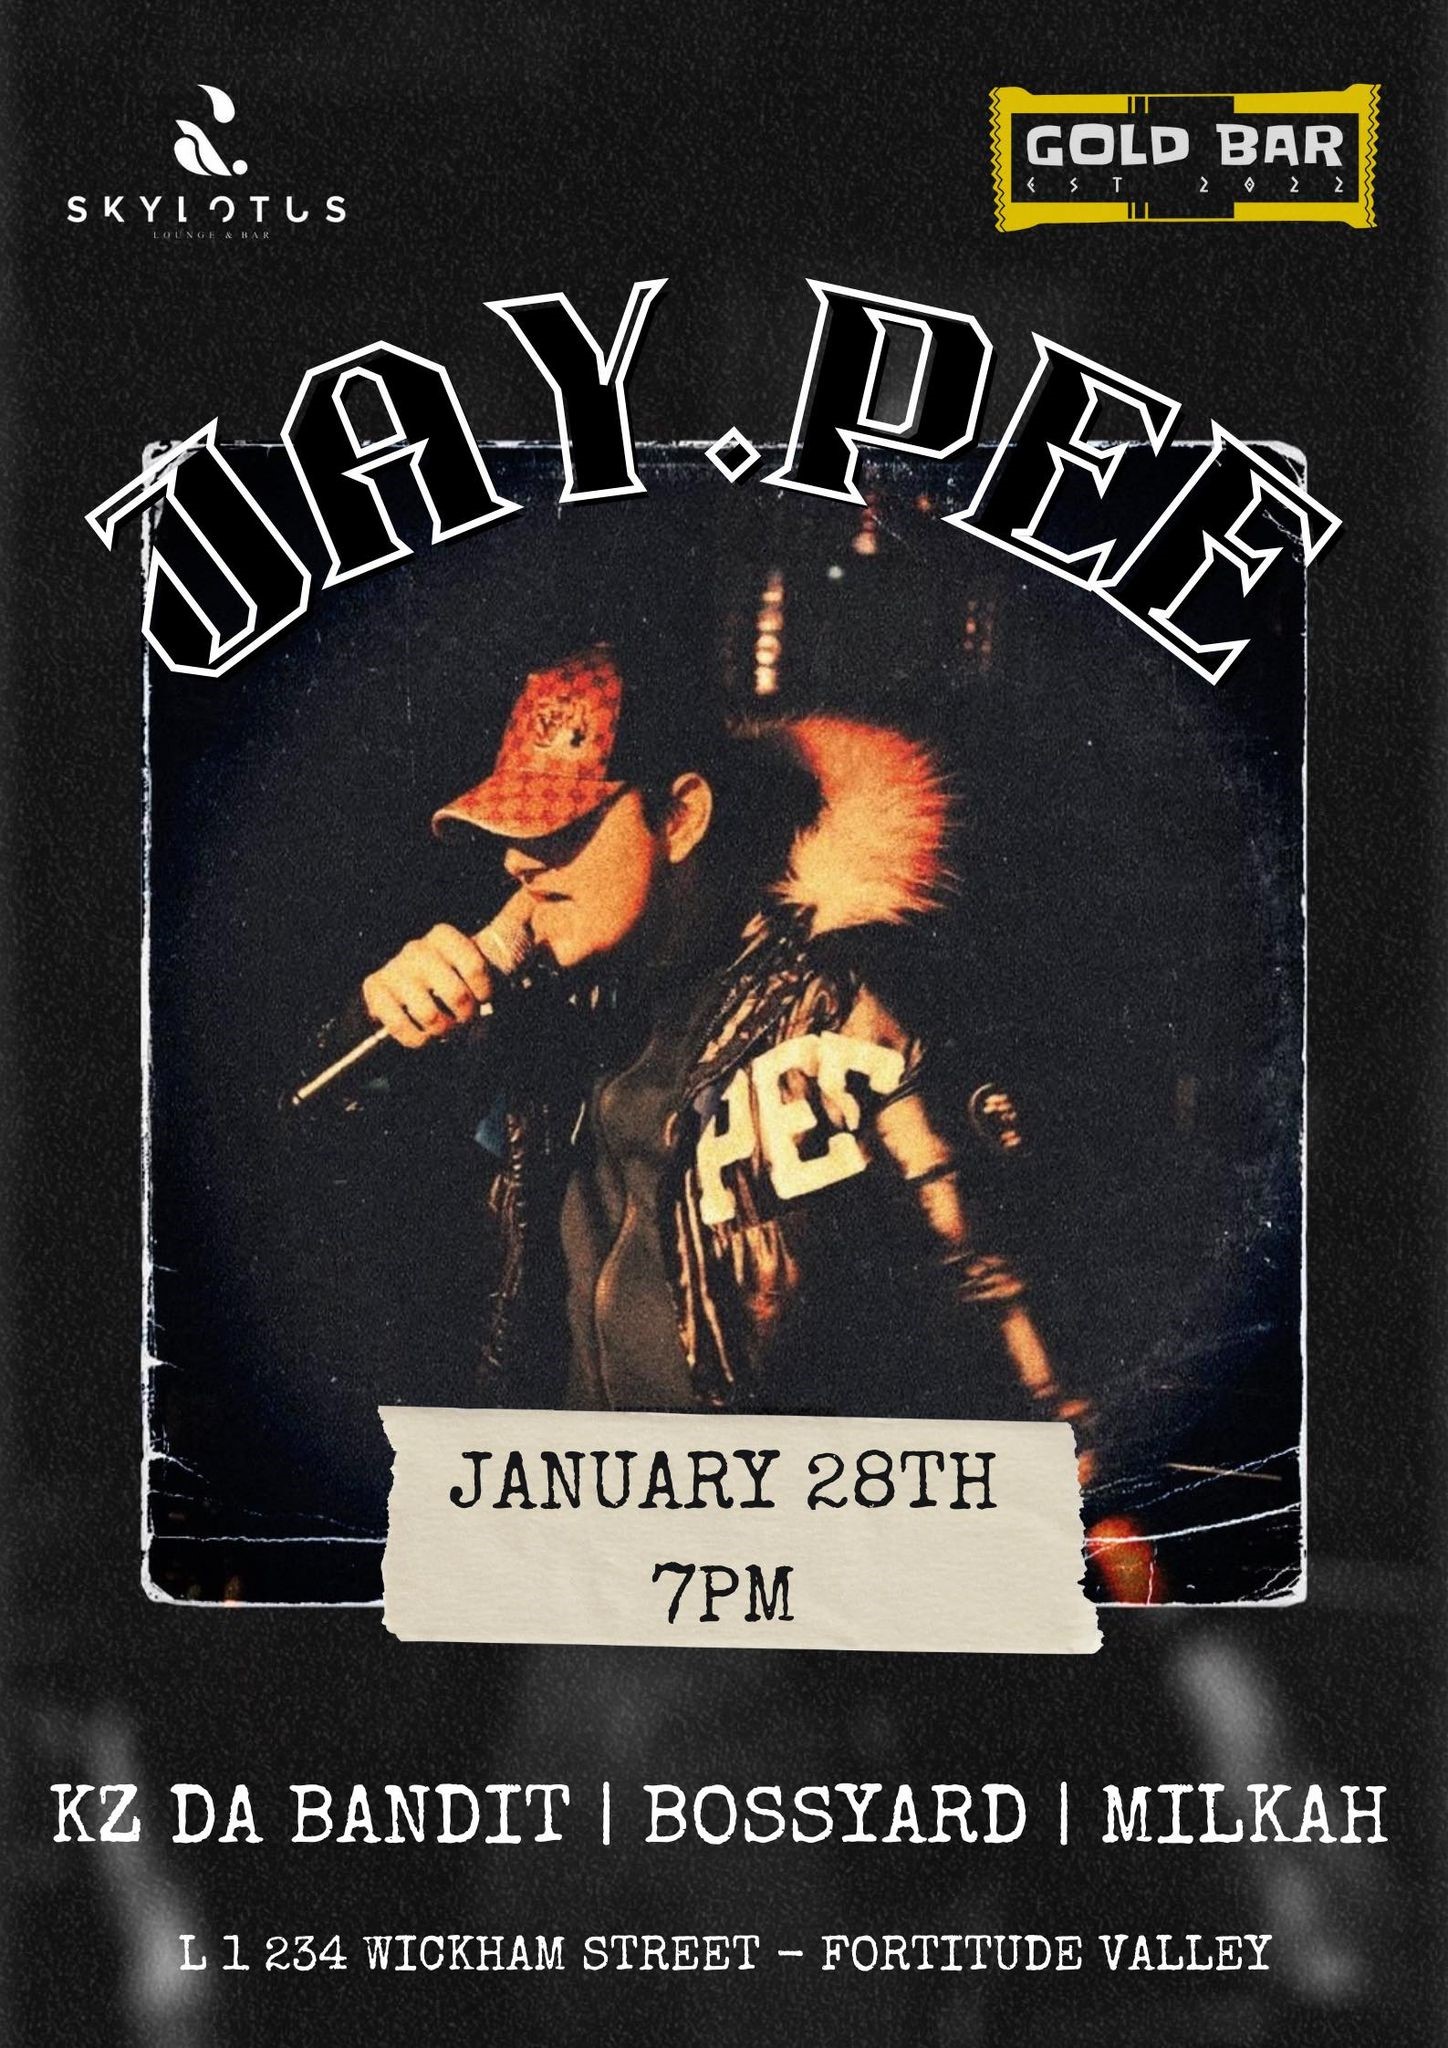 Gold Bar presents - Jay.Pee  on Jan 28, 19:00@Sky And Lotus - Buy tickets and Get information on GOLDBARBNE 